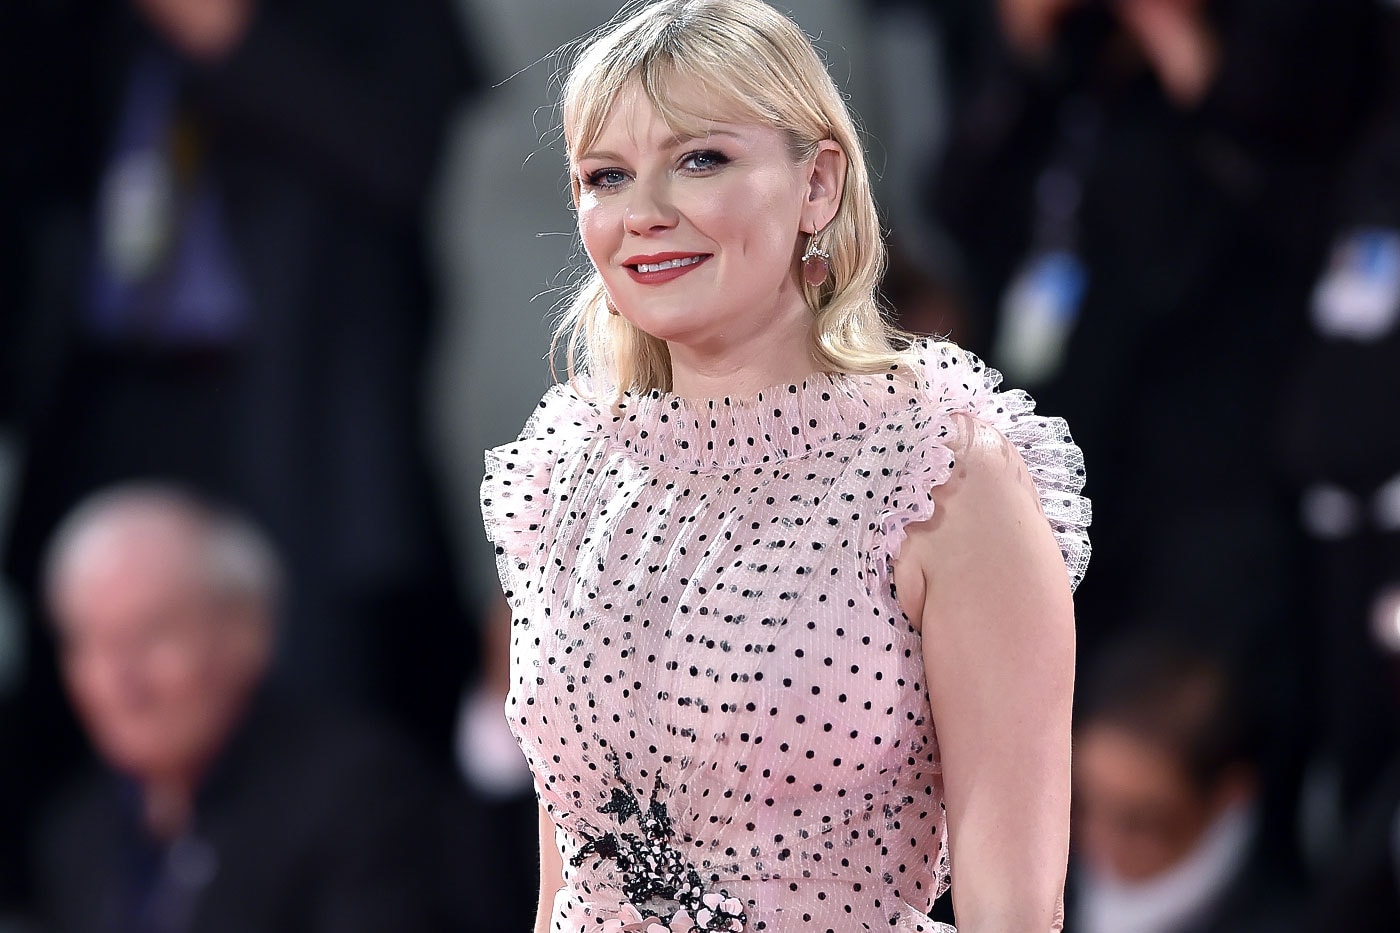 Kirsten Dunst Says She Would Like to Return to the 'Spider-Man' Universe marvel cinematic universe tom holland peter parker tobey maguier andrew garfield sam raimi